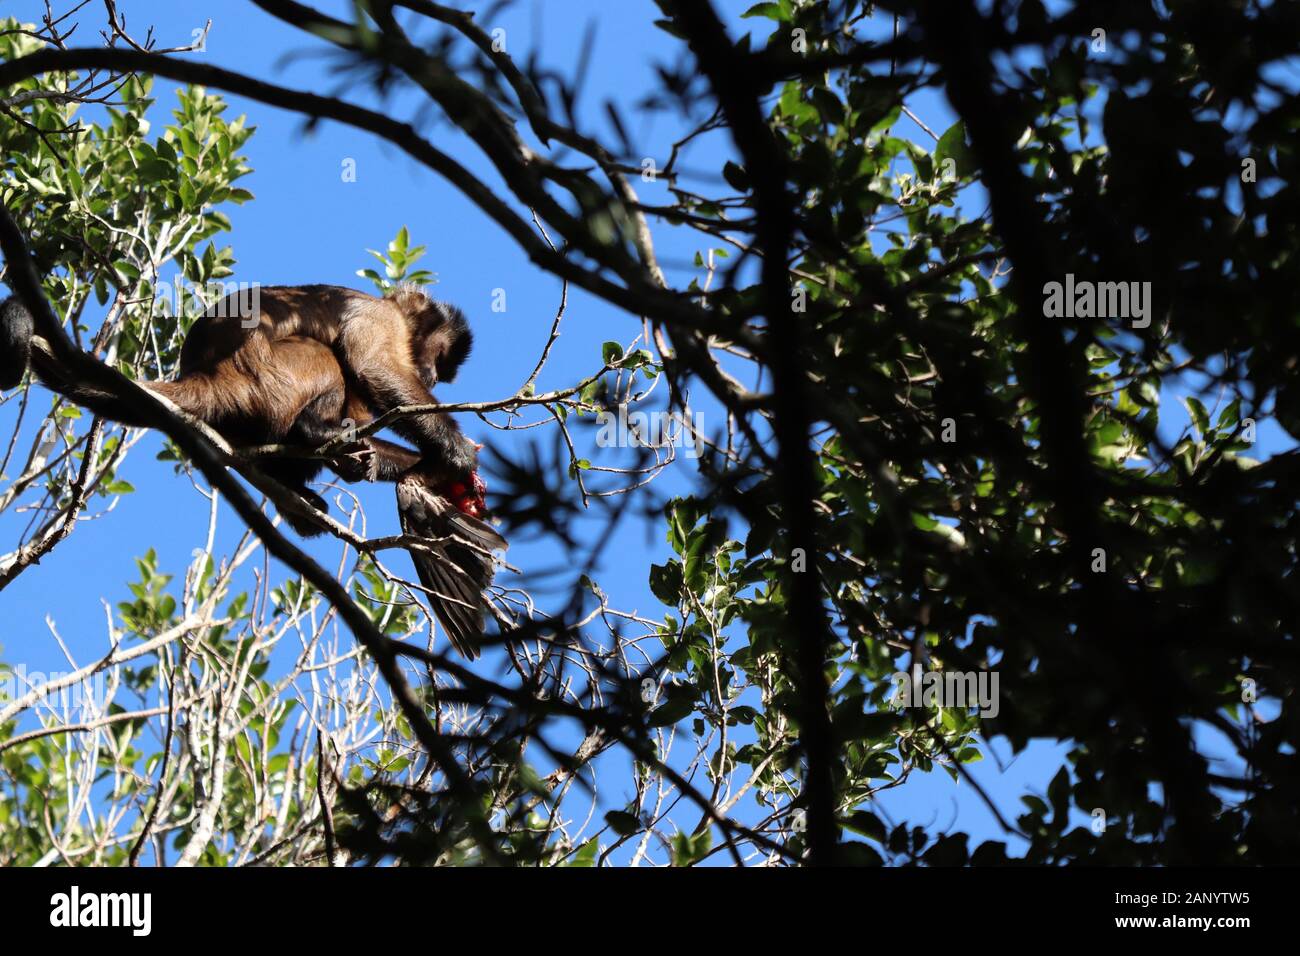 Low angle shot of a monkey hunting a bird on the branch of a tree in a forest Stock Photo